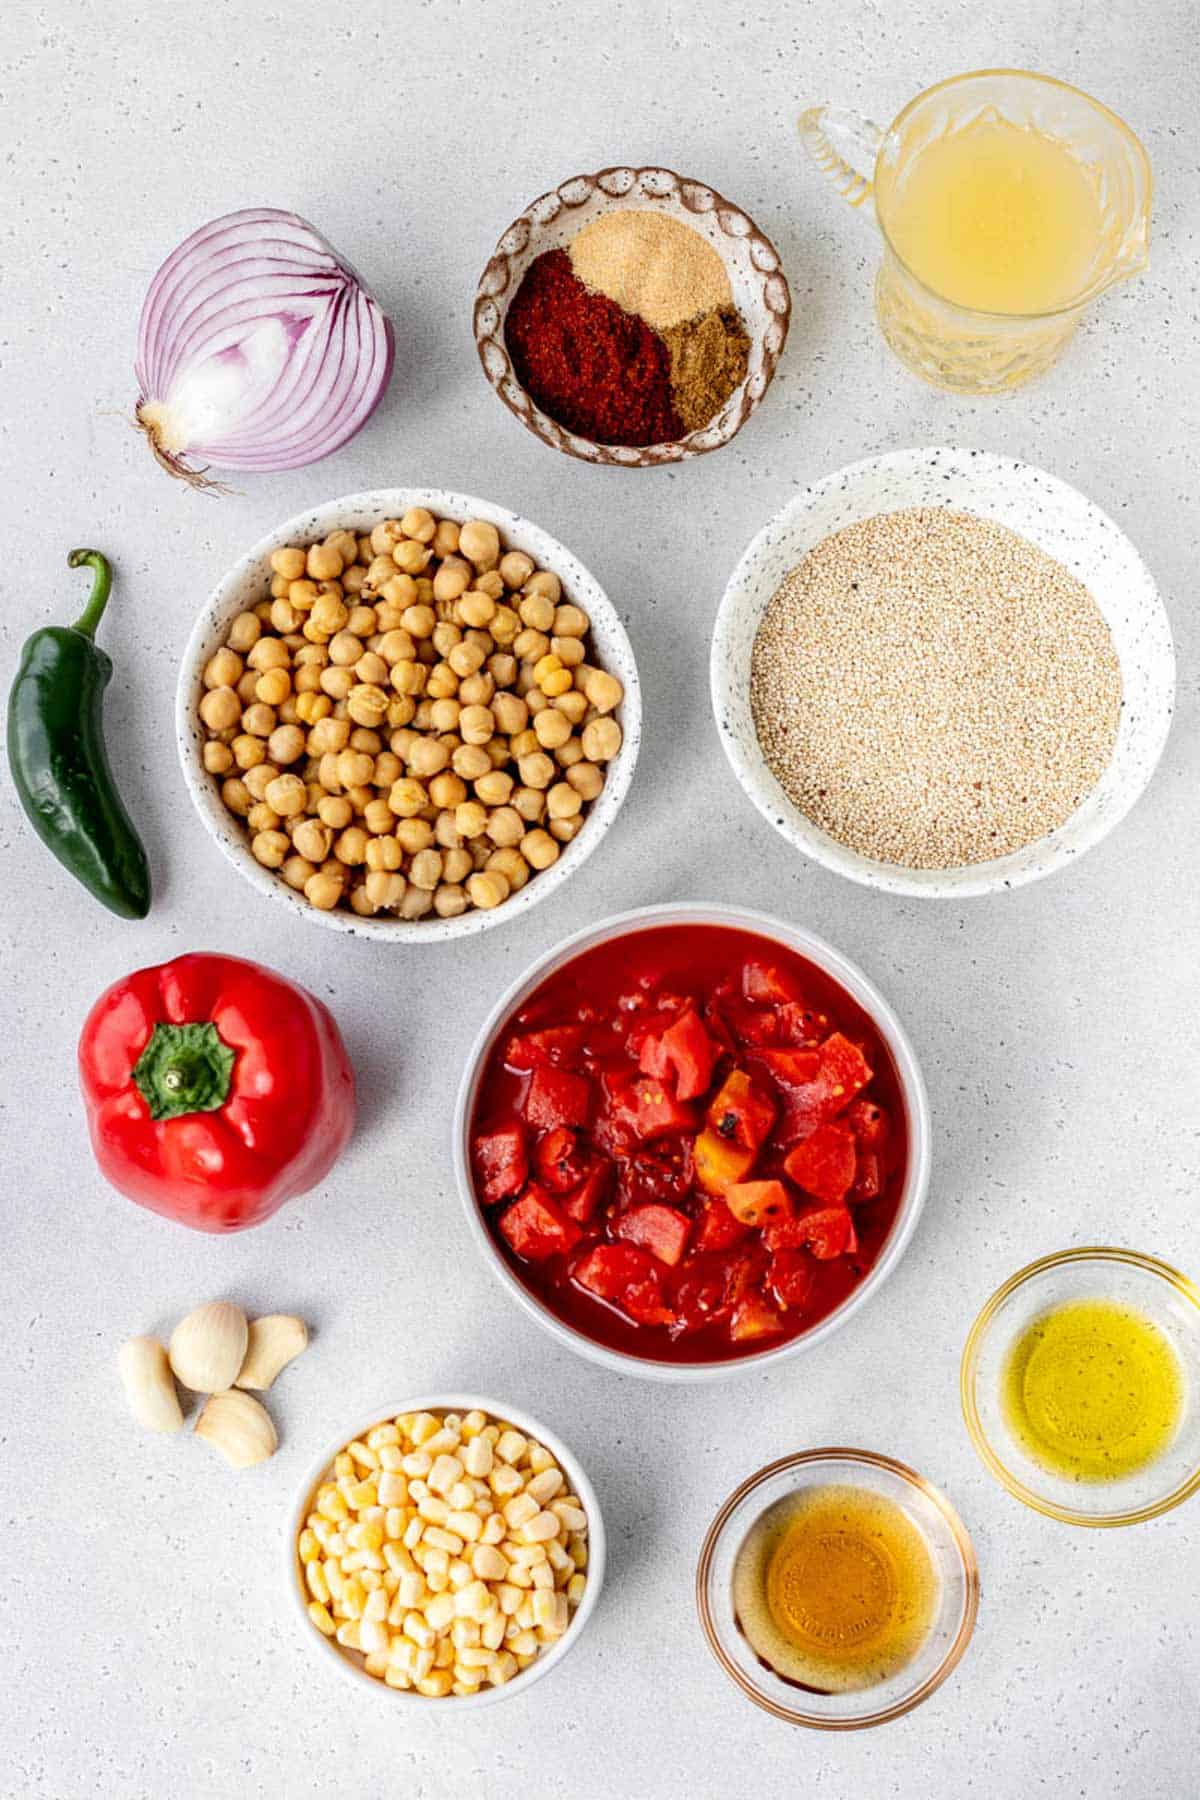 Ingredients for Mexican garbanzo soup, including garlic cloves, corn, maple syrup, fire roasted tomatoes, vegetables, vegetable broth, chickpeas, quinoa and seasonings.